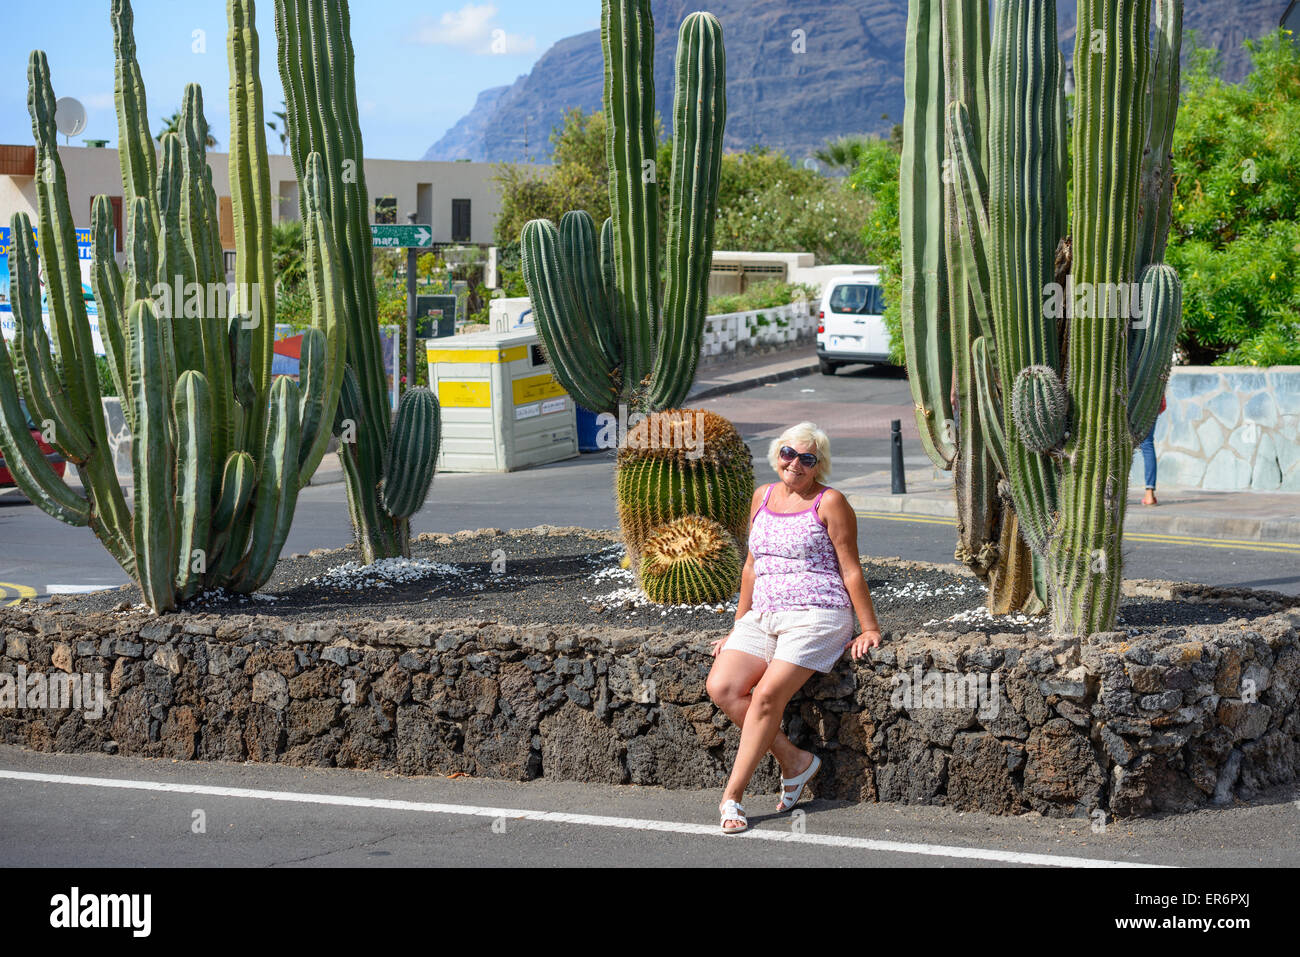 Senior lady is sitting retaining wall of cacti flower-bed on the corner of Av. Jose Gonzales Forte and Poblado Marinero and Tama Stock Photo